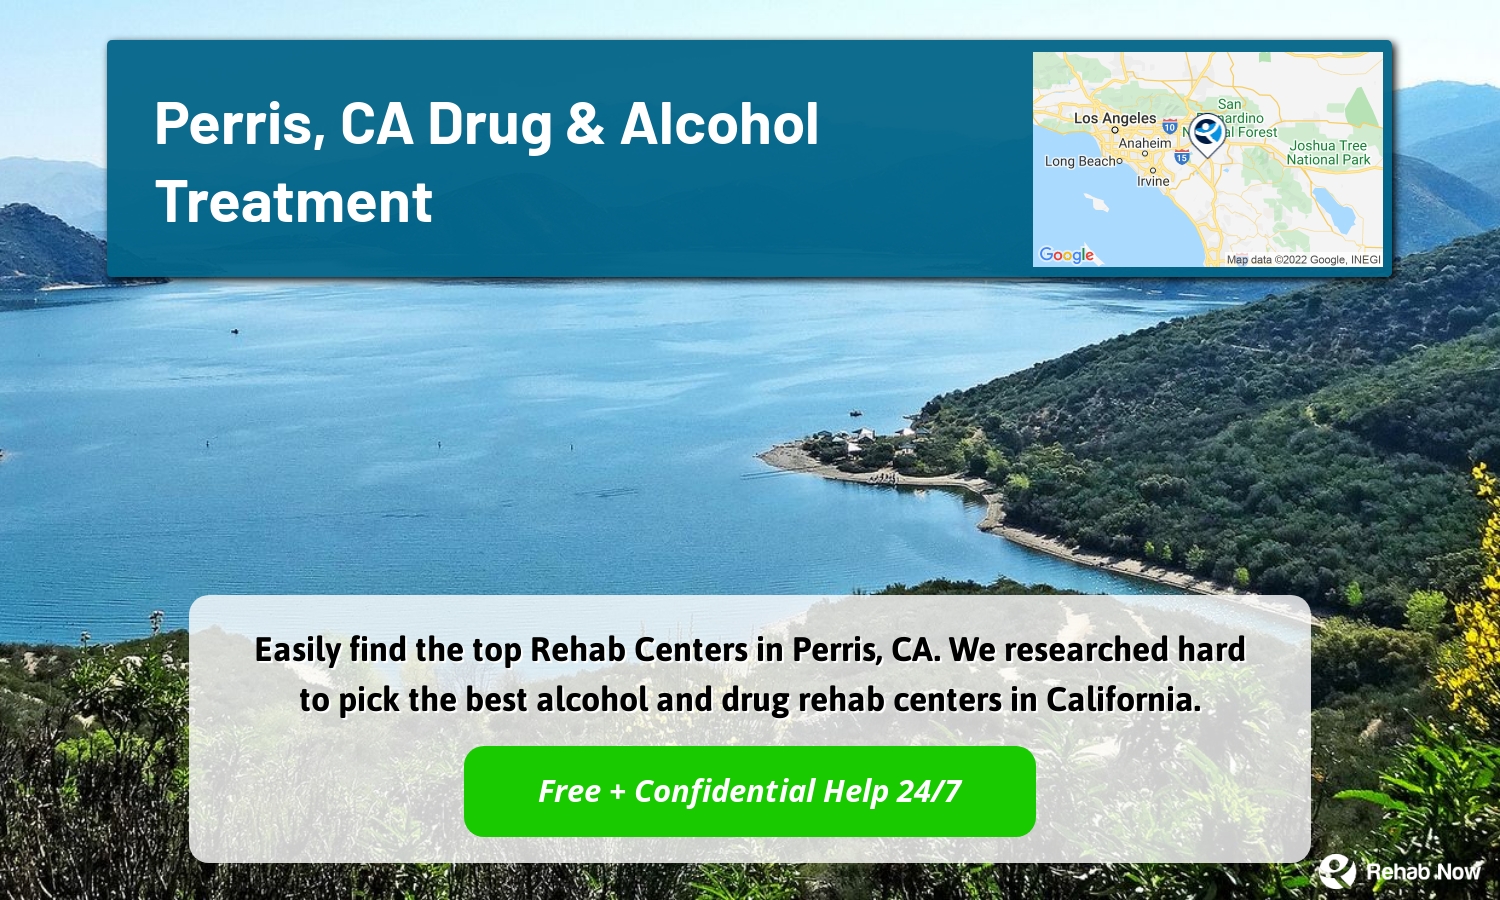 Easily find the top Rehab Centers in Perris, CA. We researched hard to pick the best alcohol and drug rehab centers in California.